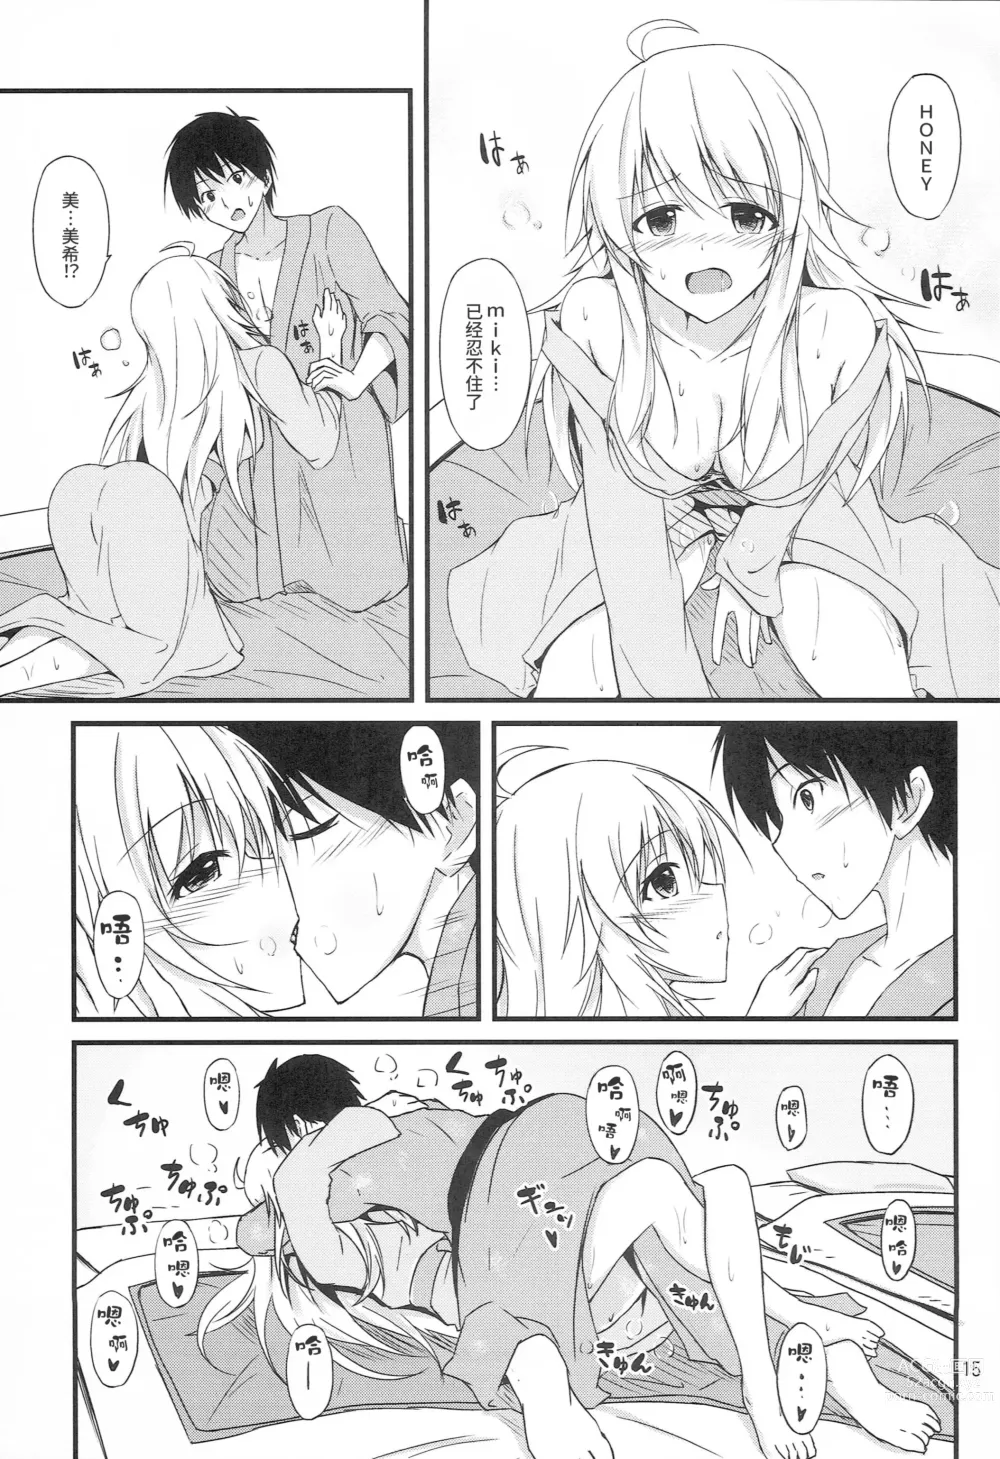 Page 13 of doujinshi Miki to Honey no DeepLove